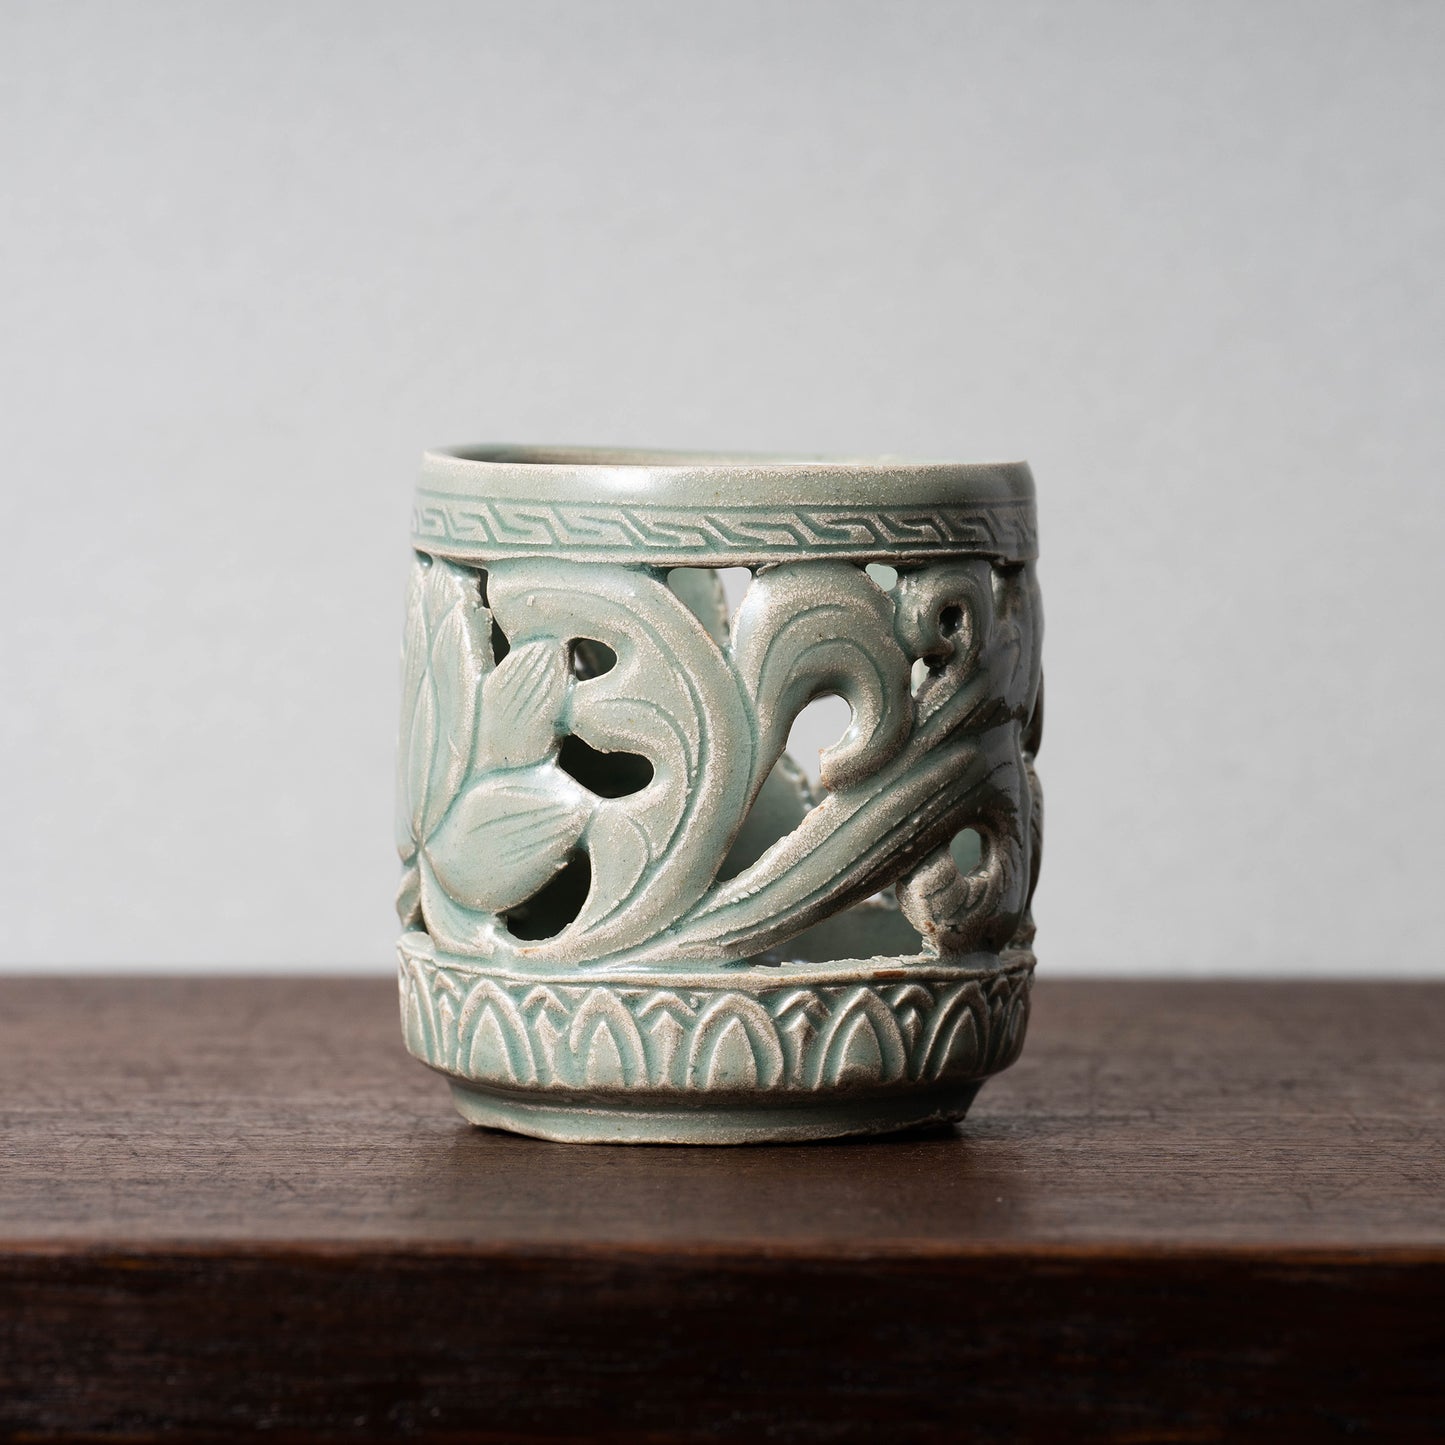 Goryeo Celadon Brush Stand with Lotus Scroll Decoration in Openwork